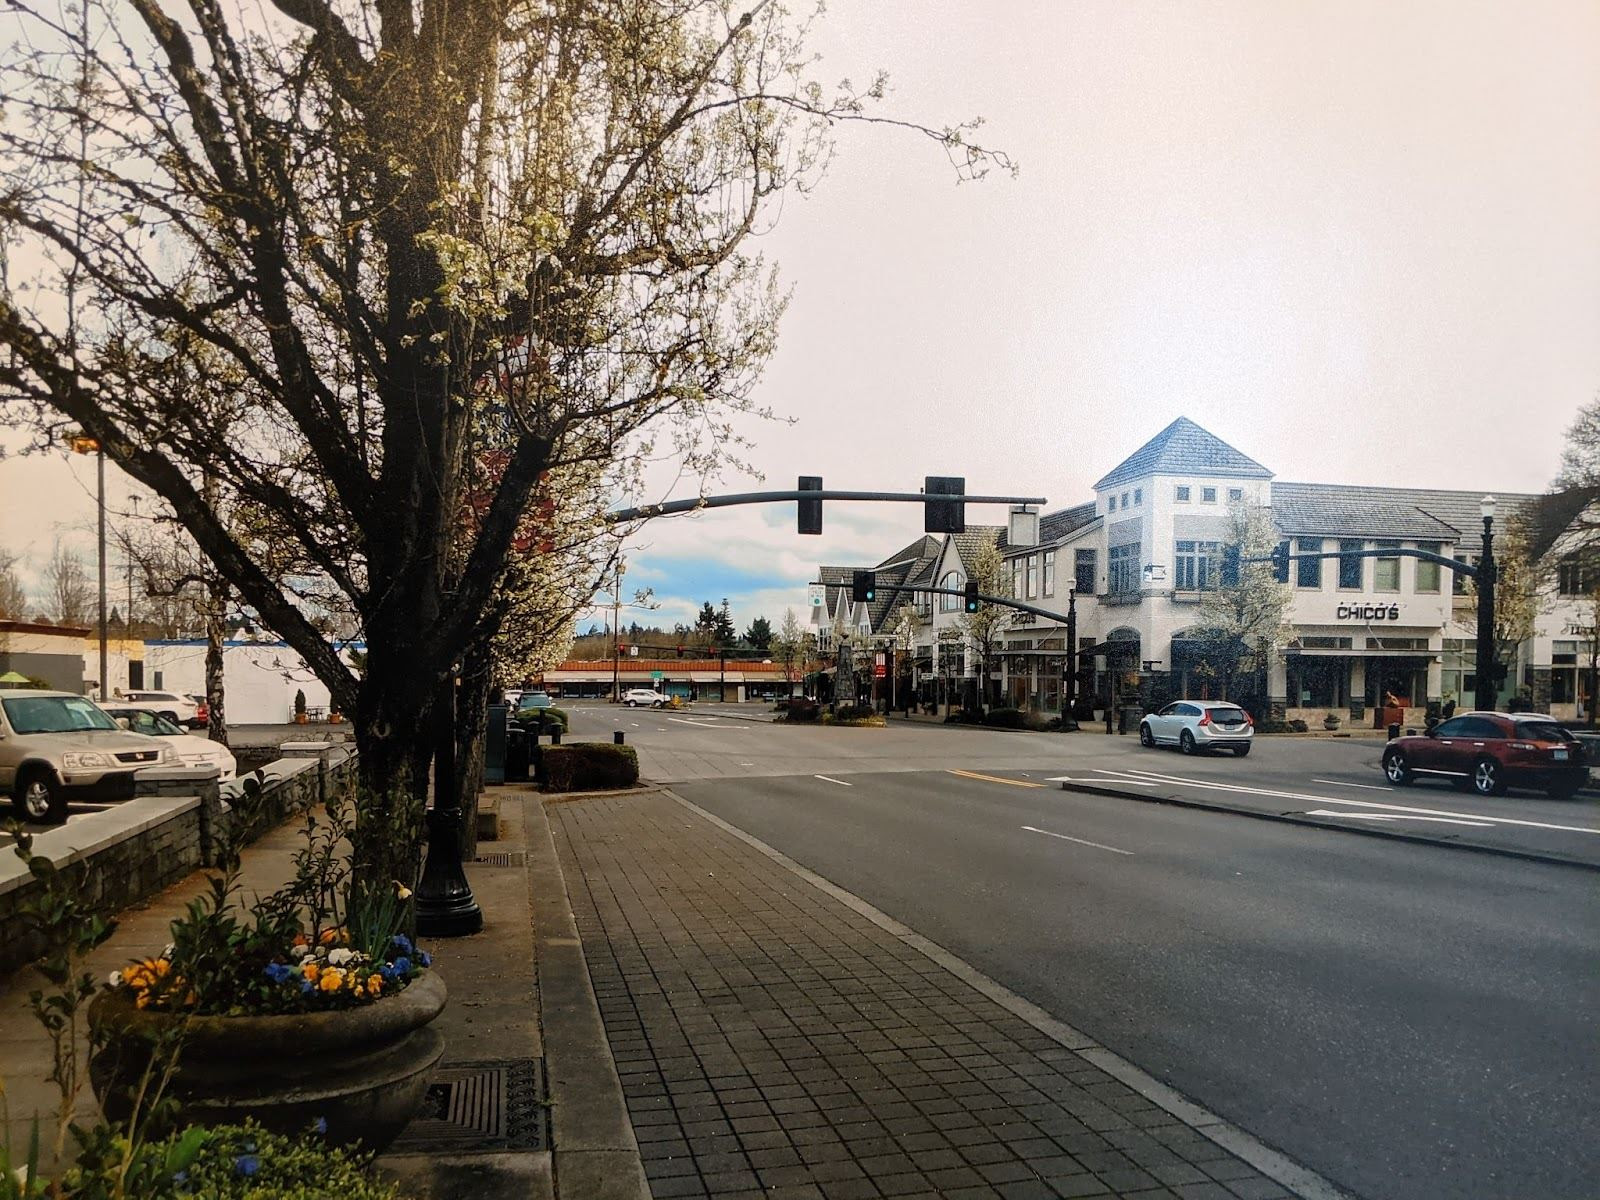 An image of A Avenue in Lake Oswego, with a view toward the river and between 1st and 2nd Streets. 